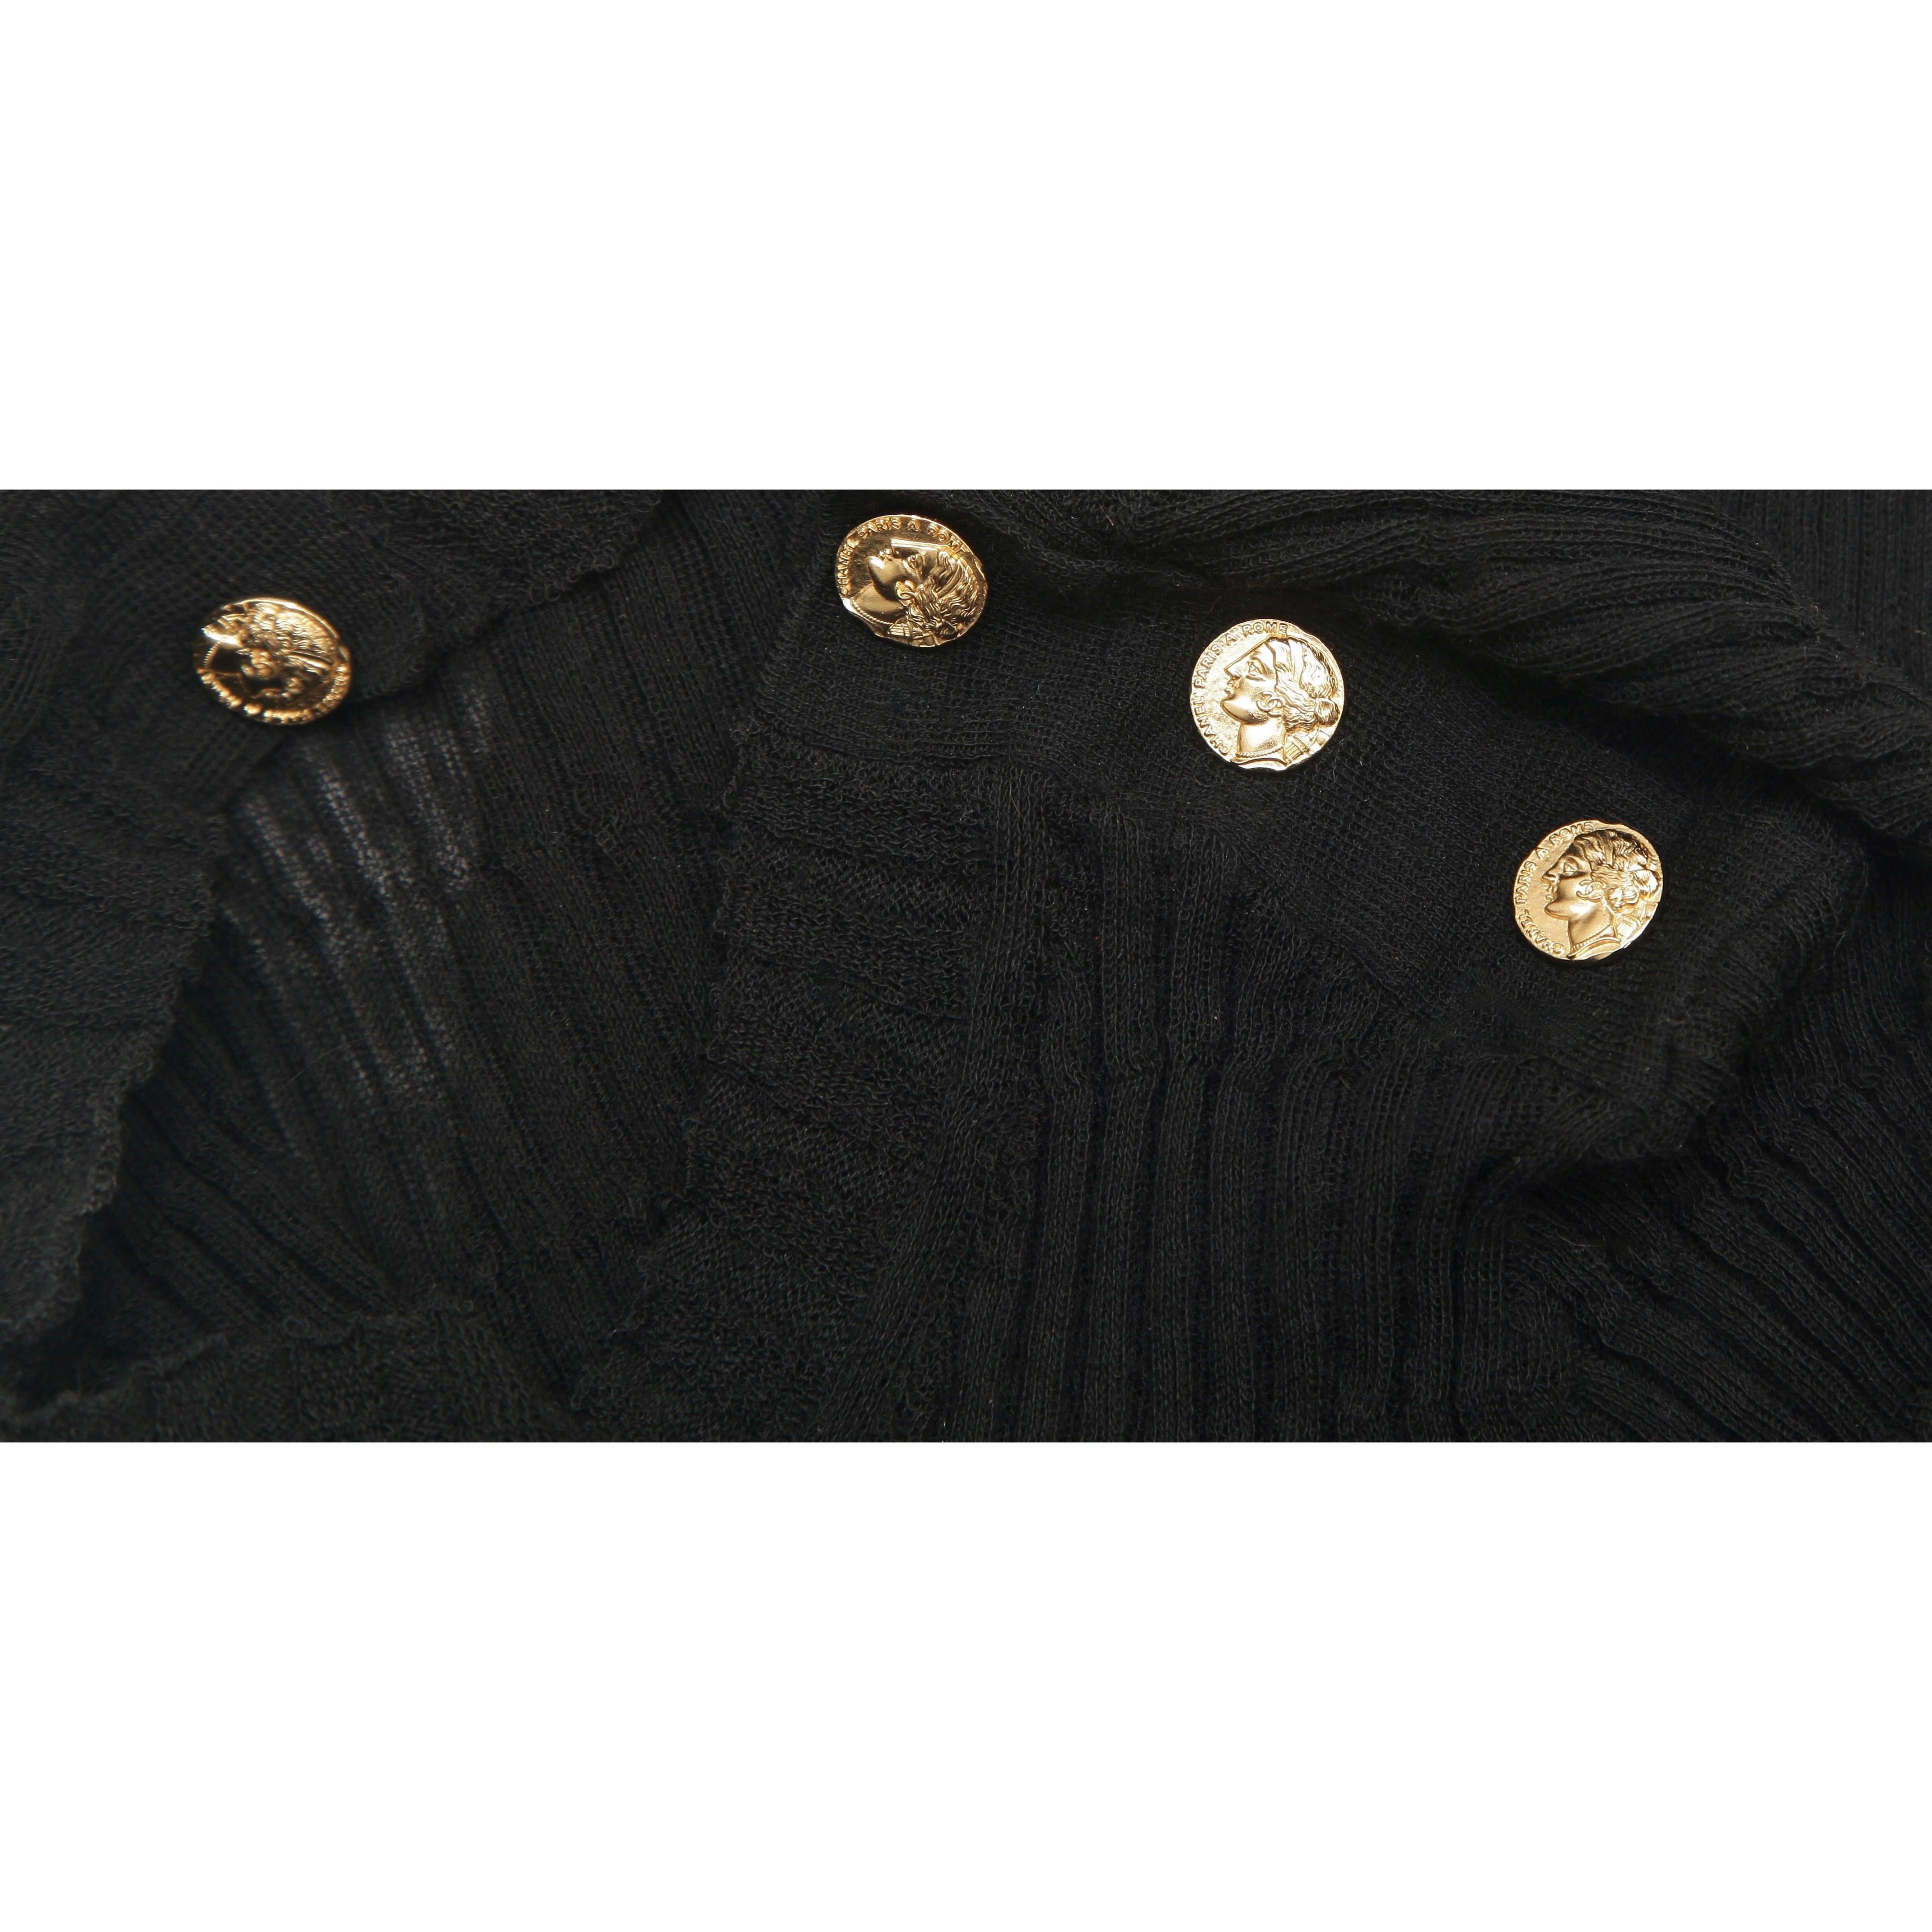 CHANEL Black Sweater Top Knit Short Sleeve CC Gold-Tone Logo Buttons Sz 34 2016 In Excellent Condition For Sale In Hollywood, FL